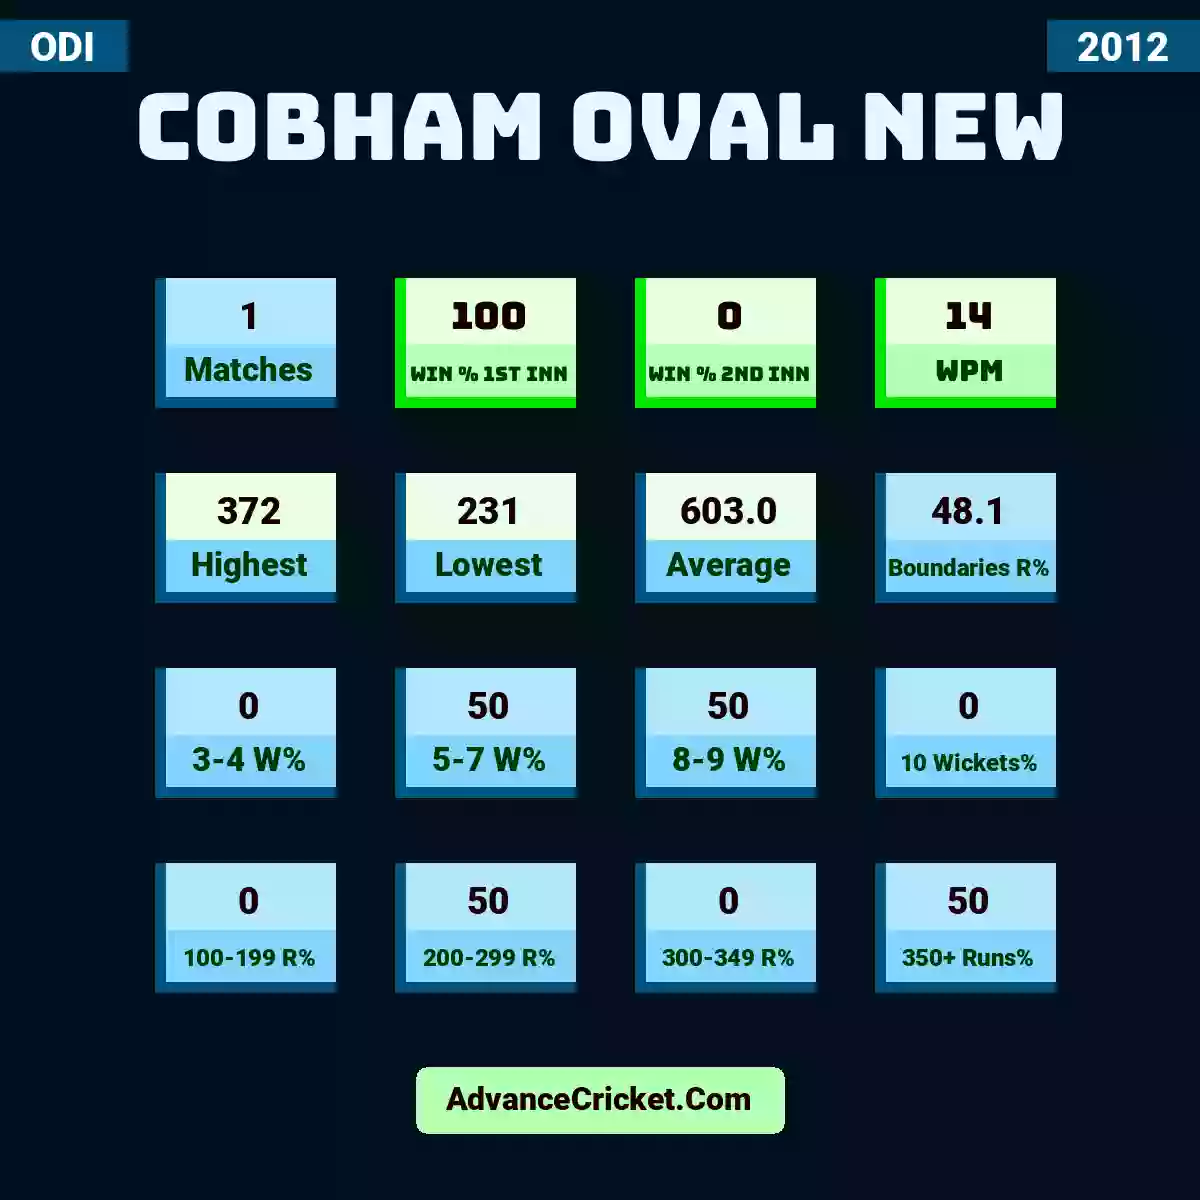 Image showing Cobham Oval New with Matches: 1, Win % 1st Inn: 100, Win % 2nd Inn: 0, WPM: 14, Highest: 372, Lowest: 231, Average: 603.0, Boundaries R%: 48.1, 3-4 W%: 0, 5-7 W%: 50, 8-9 W%: 50, 10 Wickets%: 0, 100-199 R%: 0, 200-299 R%: 50, 300-349 R%: 0, 350+ Runs%: 50.